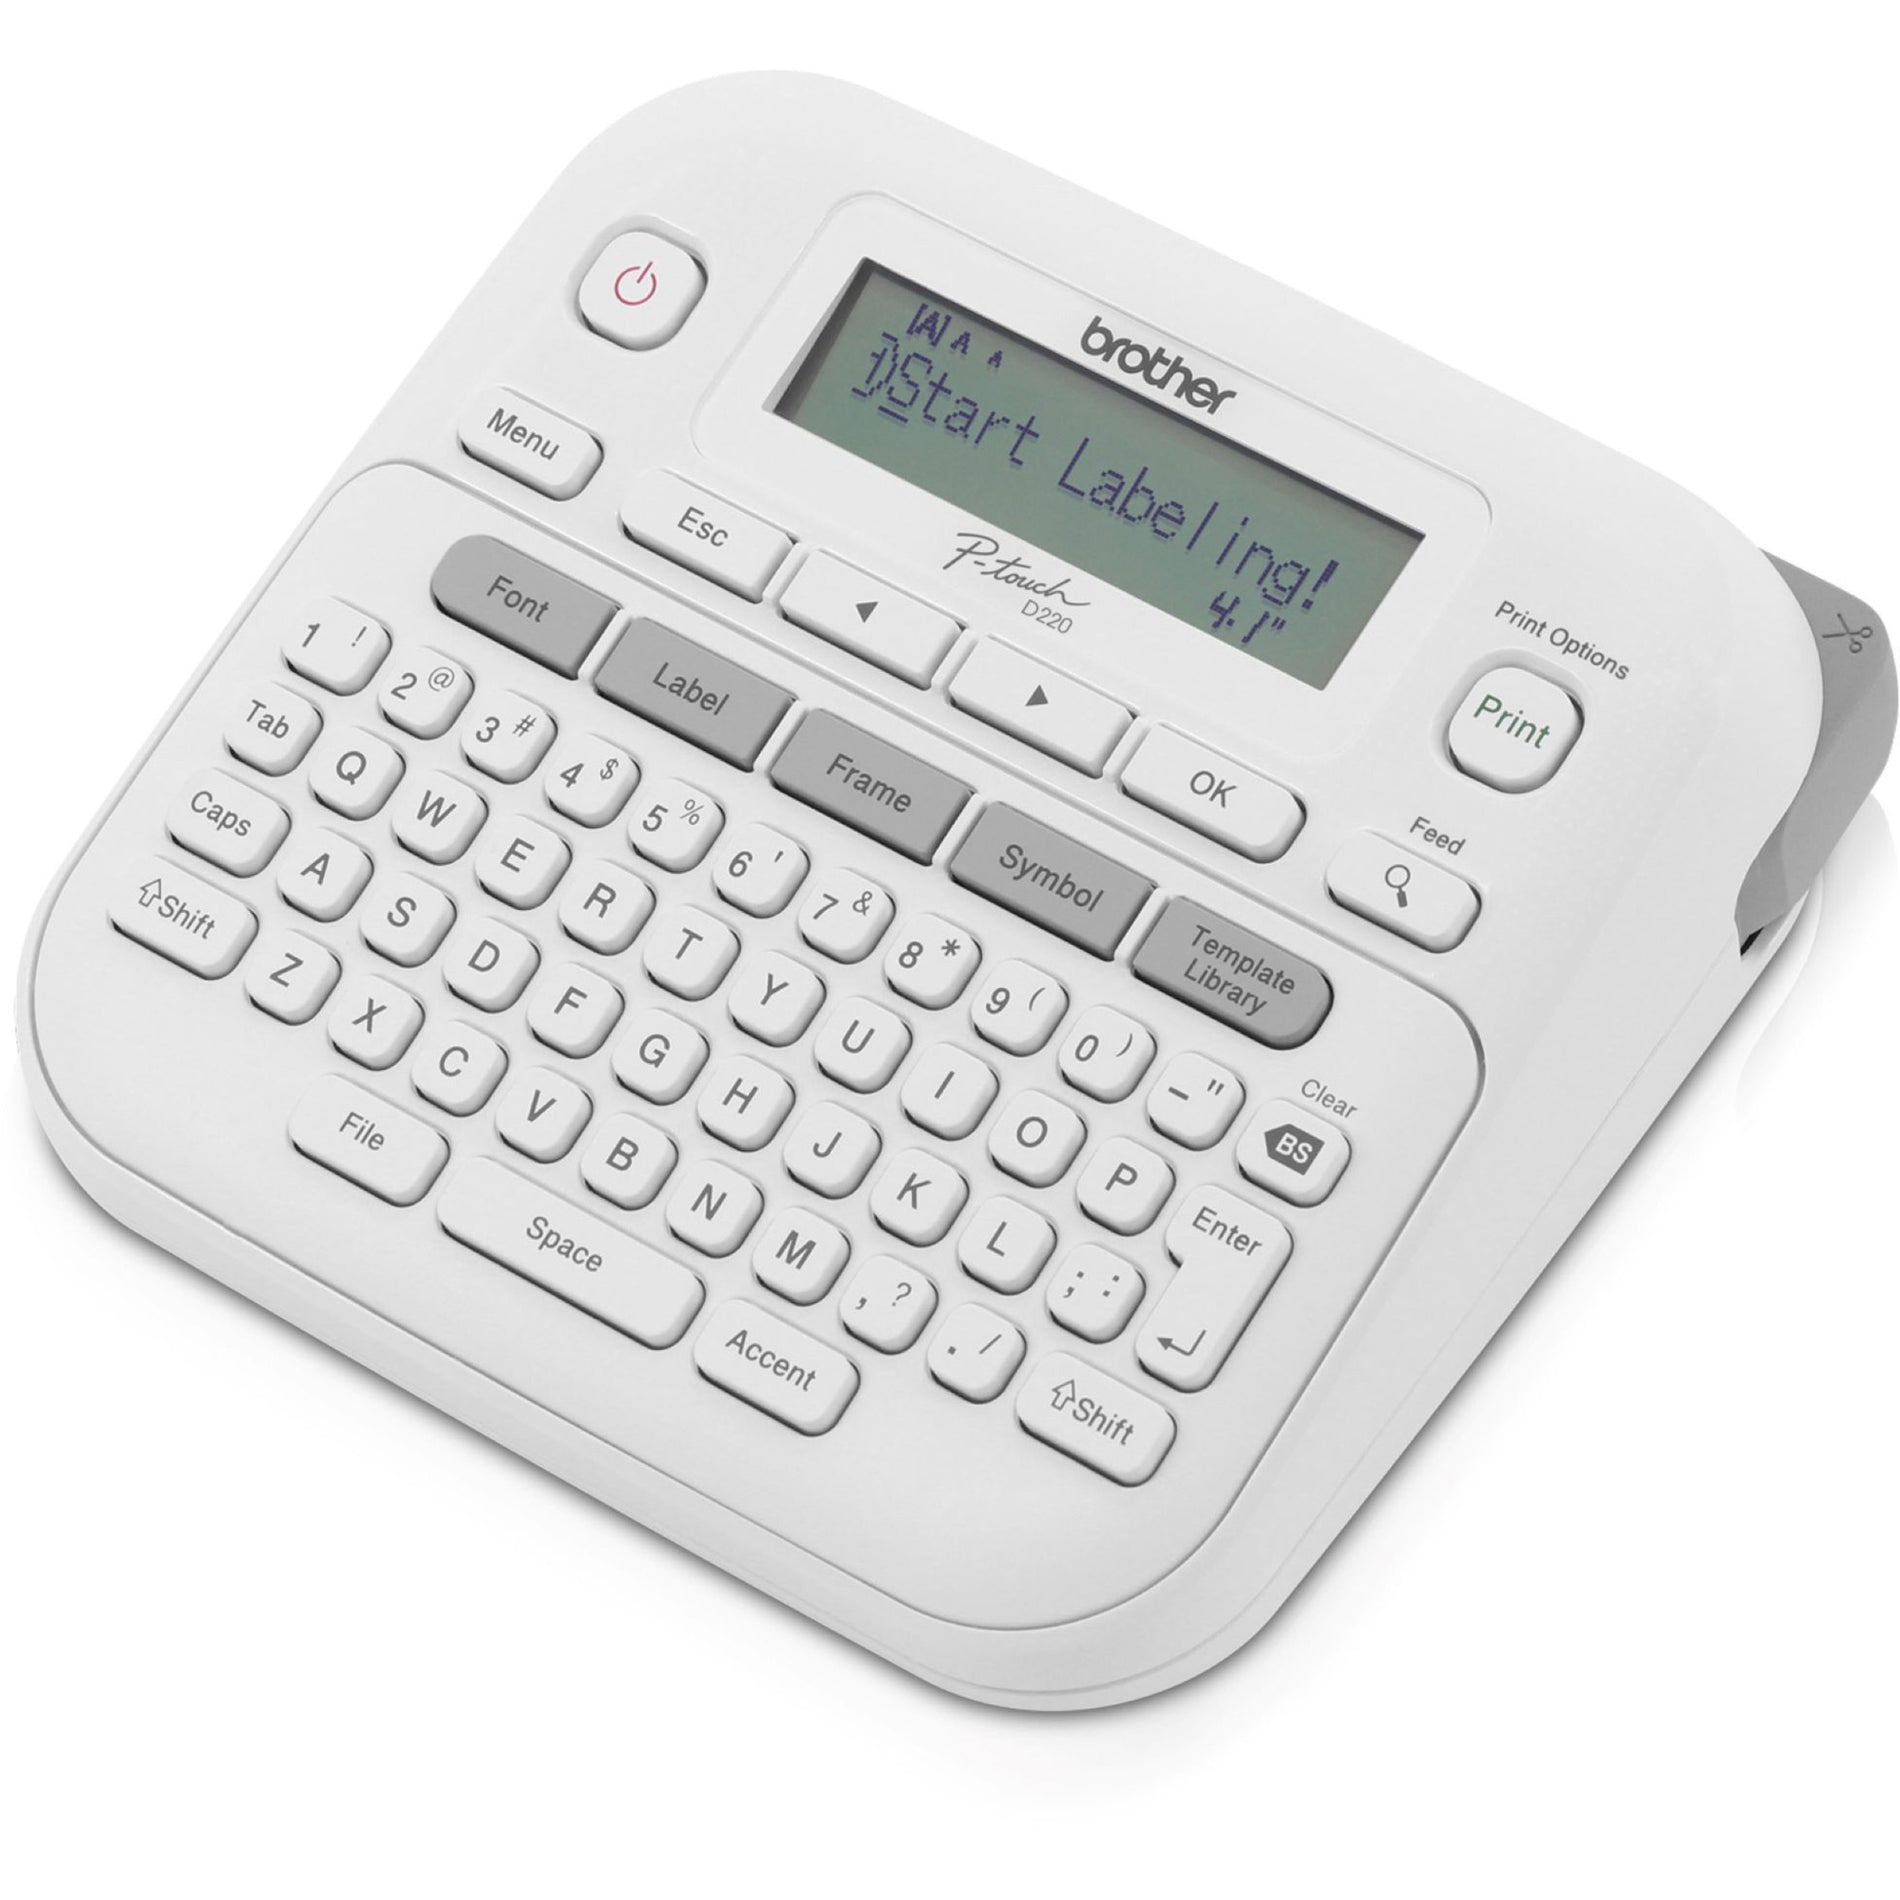 Brother PTD220 P-touch PT-D220 Home/Office Everyday Label Maker, Manual Cutter, QWERTY, Auto Power Off, Built-in Designs Template, Mirror Printing, Vertical Printing, Horizontal Alignment, Auto Numbering, Label Length Setting